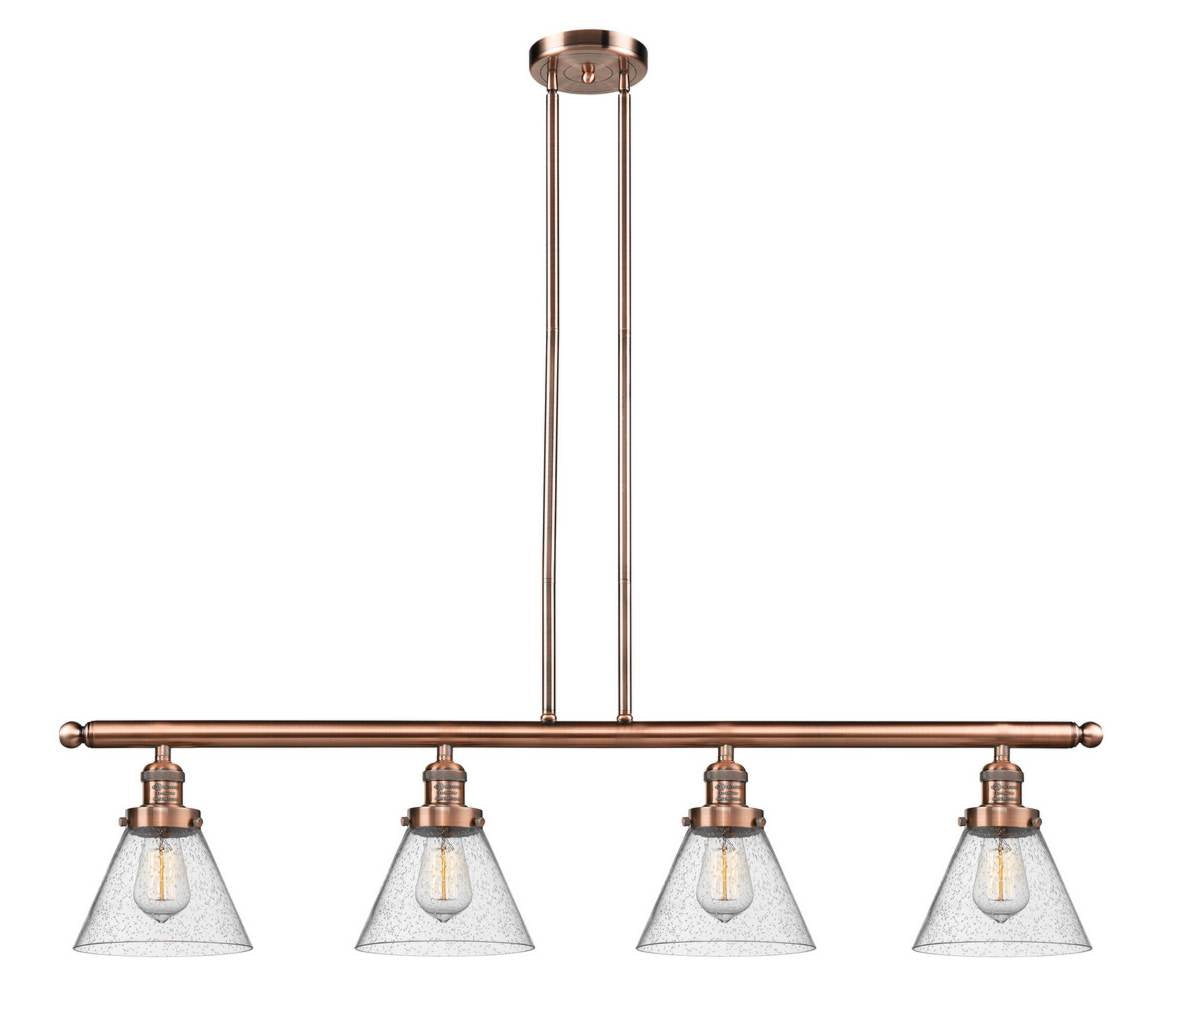 214-AC-G44 4-Light 52.375" Antique Copper Island Light - Seedy Large Cone Glass - LED Bulb - Dimmensions: 52.375 x 7.75 x 10<br>Minimum Height : 20.25<br>Maximum Height : 44.25 - Sloped Ceiling Compatible: Yes